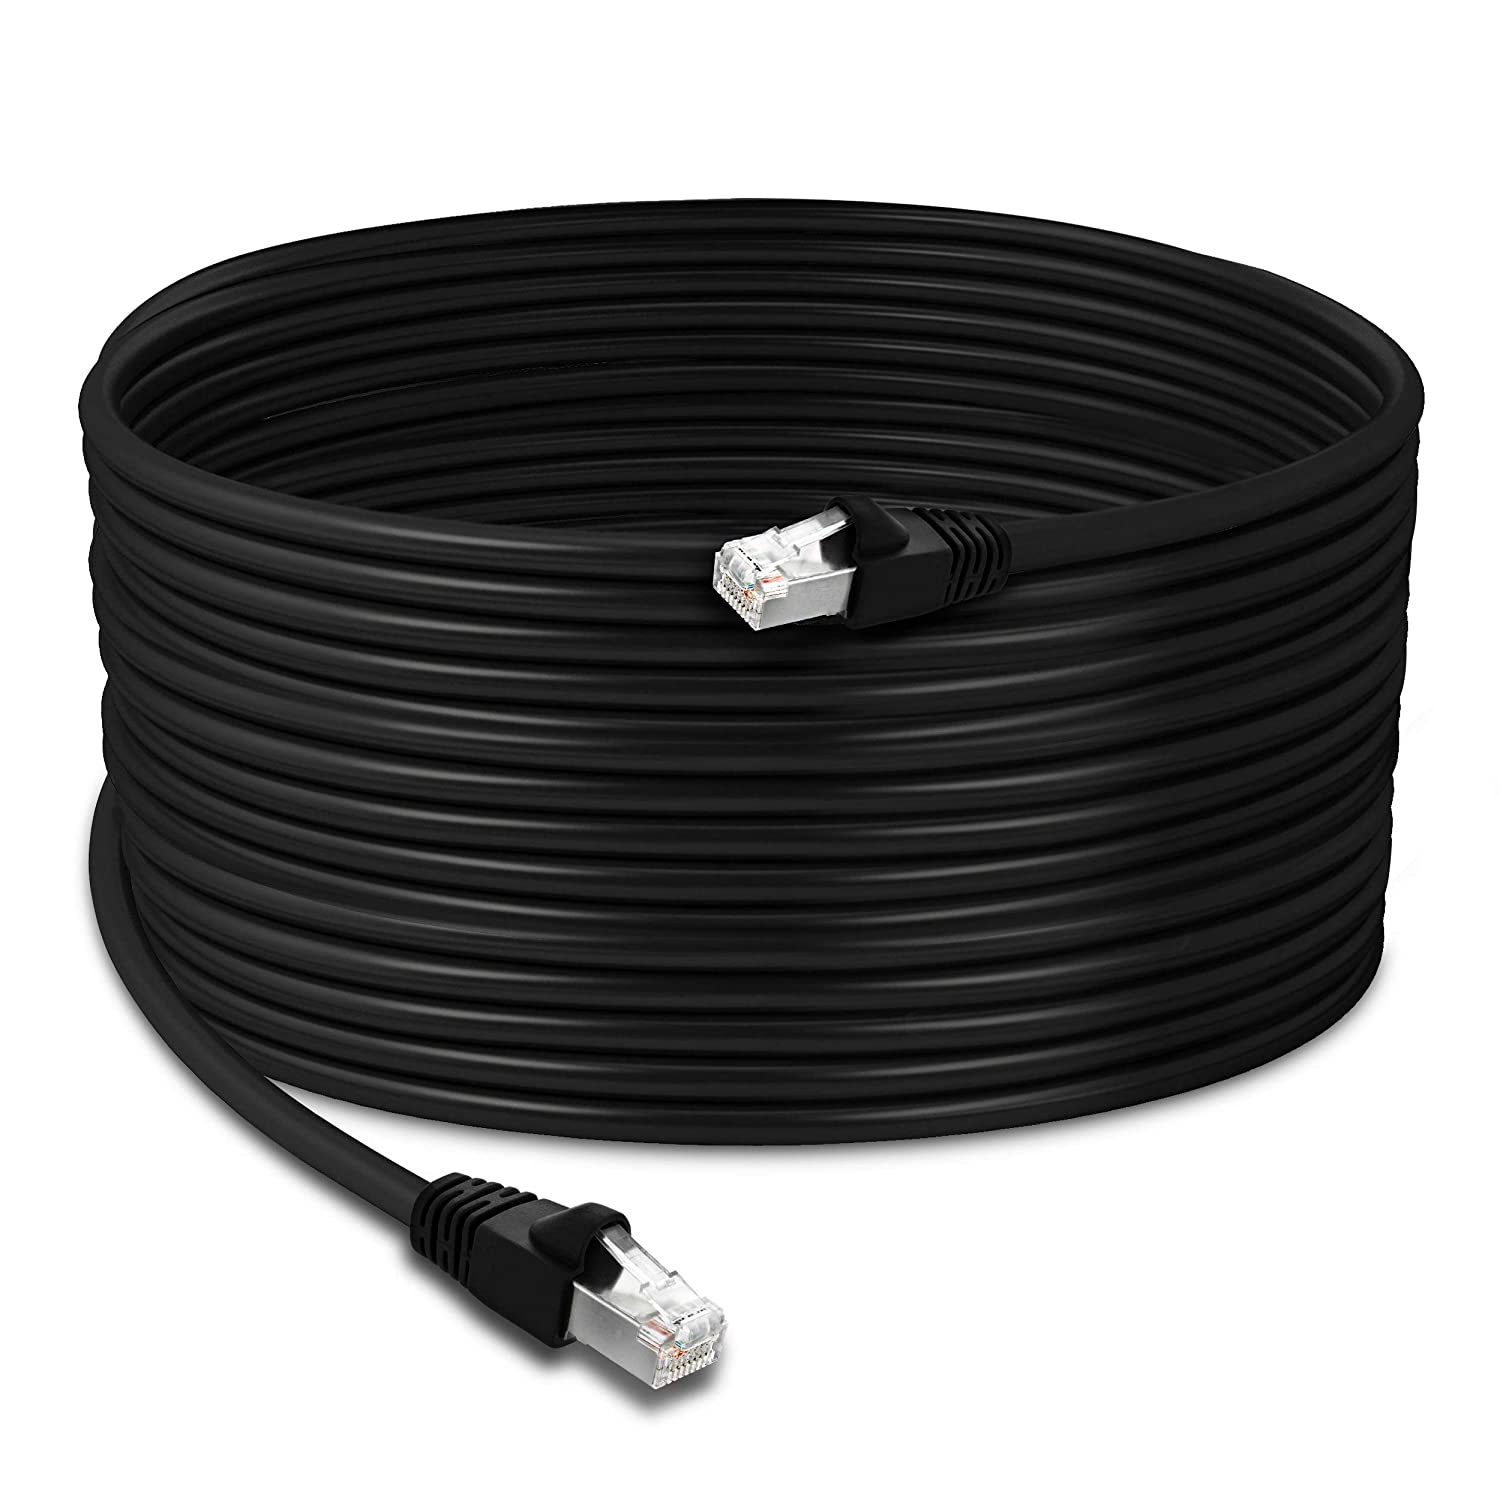 Ethernet Cable 300 ft CAT6 High Speed Internet Network LAN Cable Cord Black Outdoor Waterproof 